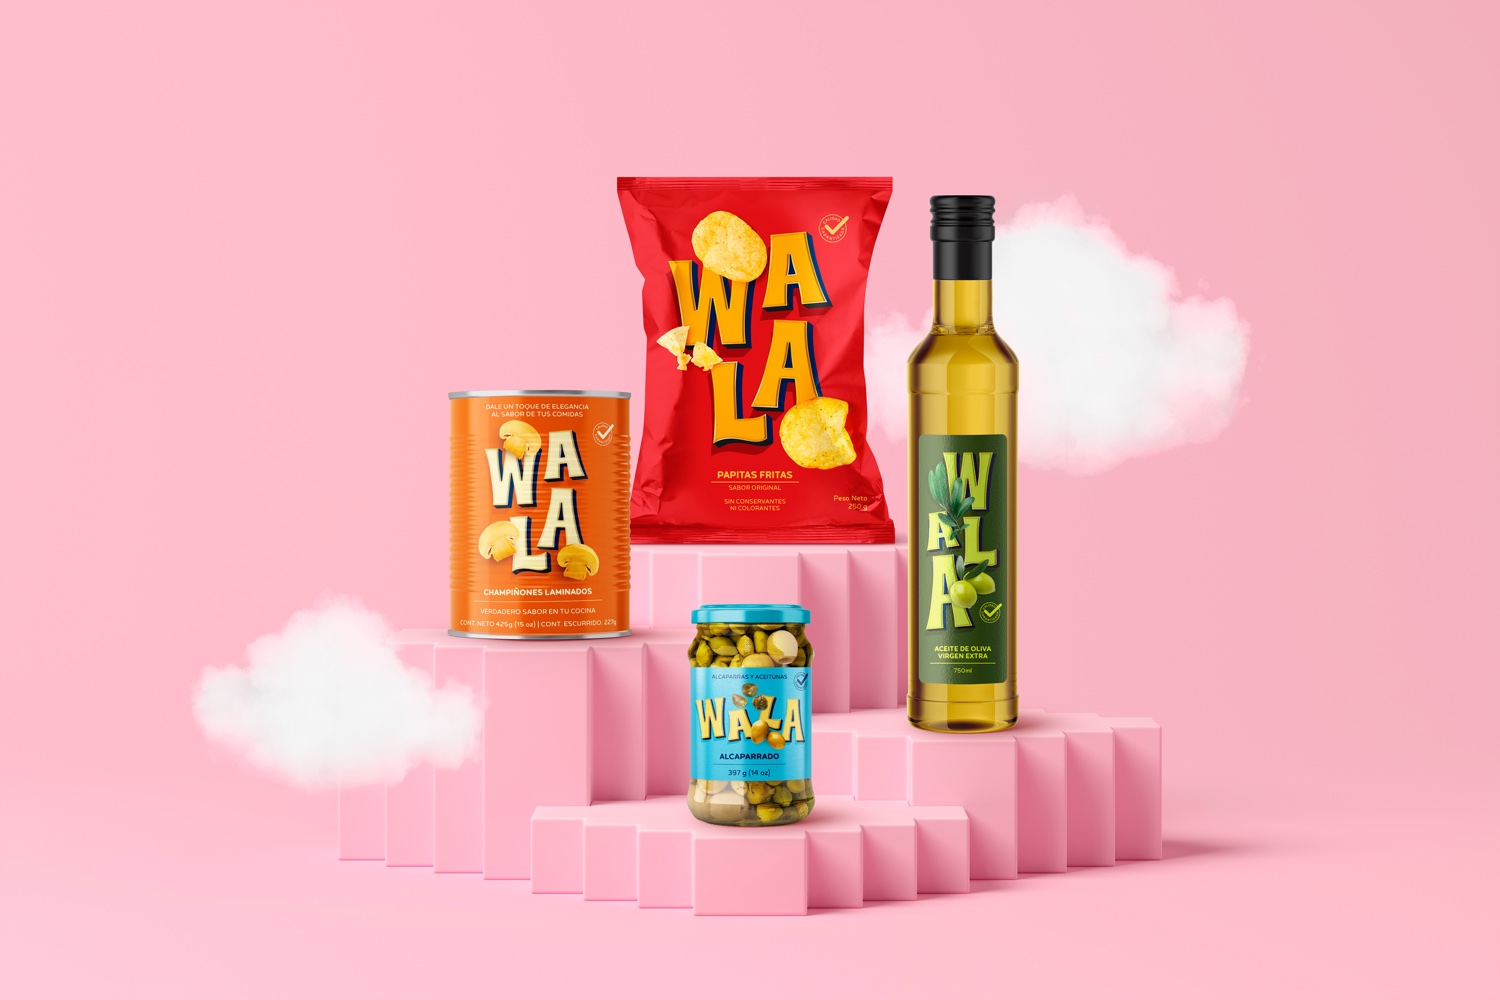 Wala and Zerca is a Bright and Bold Private Label Brand